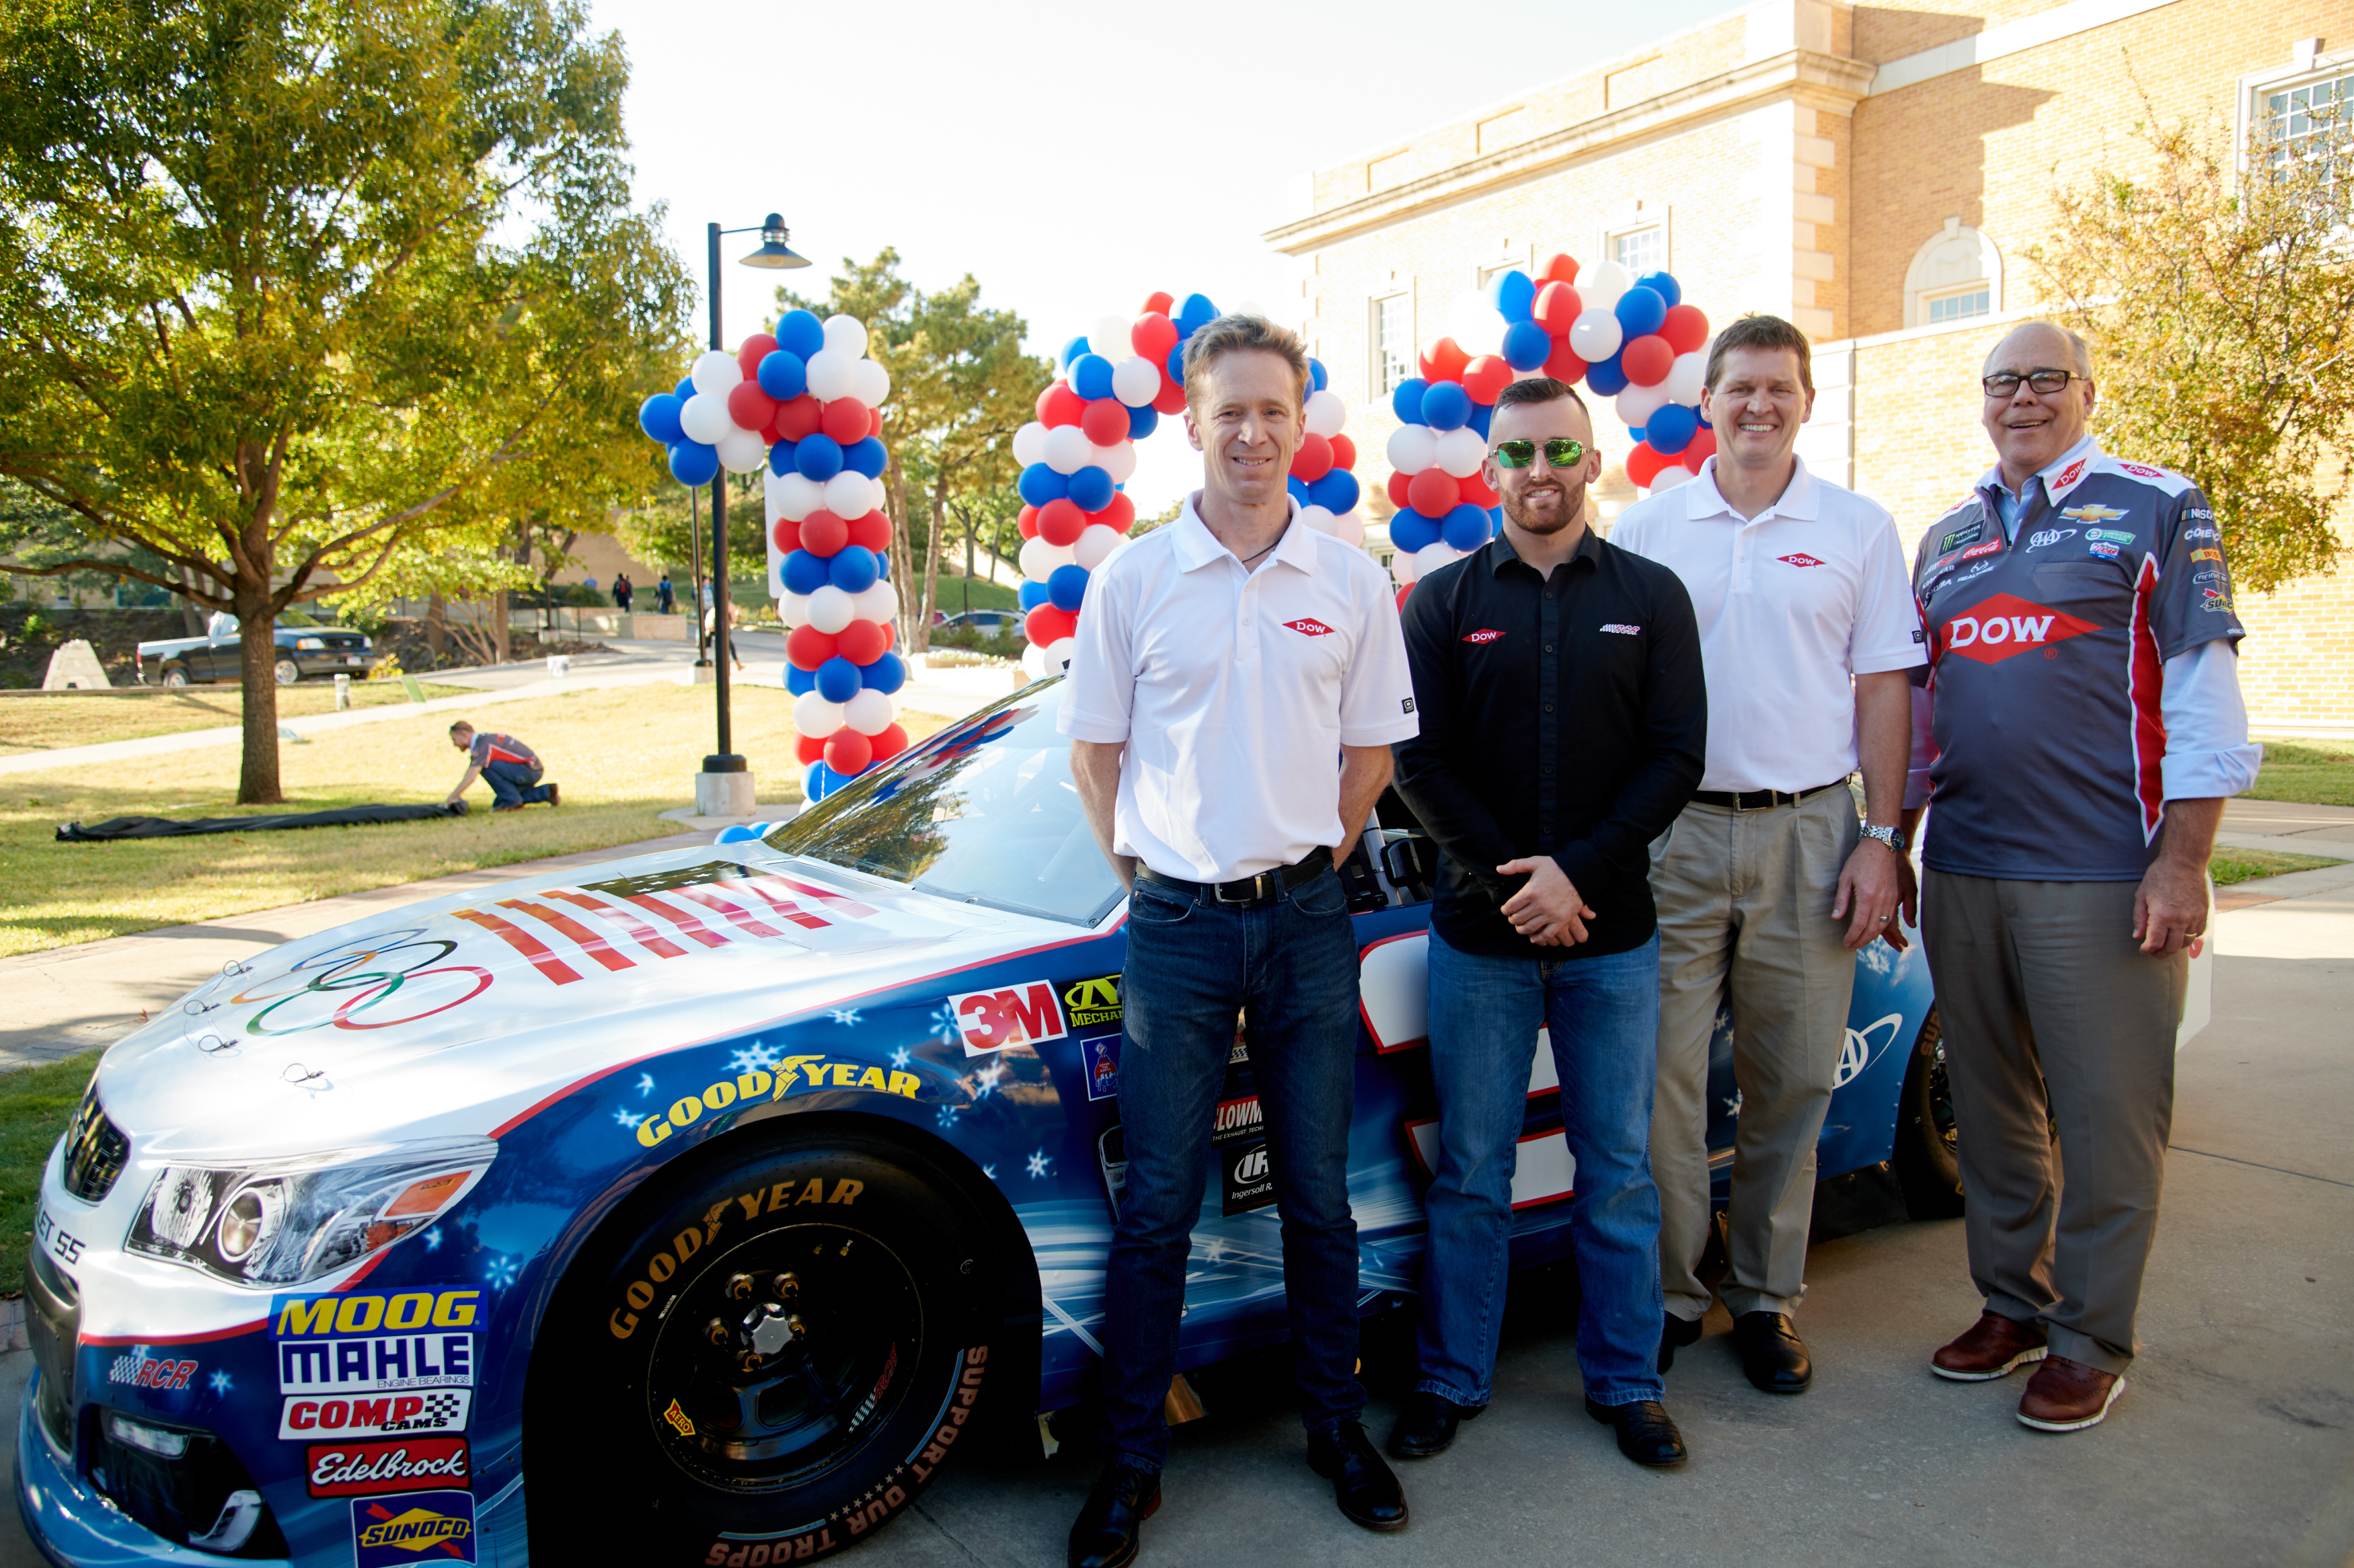 UNT inks higher education partnership with Texas Motor Speedway, providing fresh opportunities for students